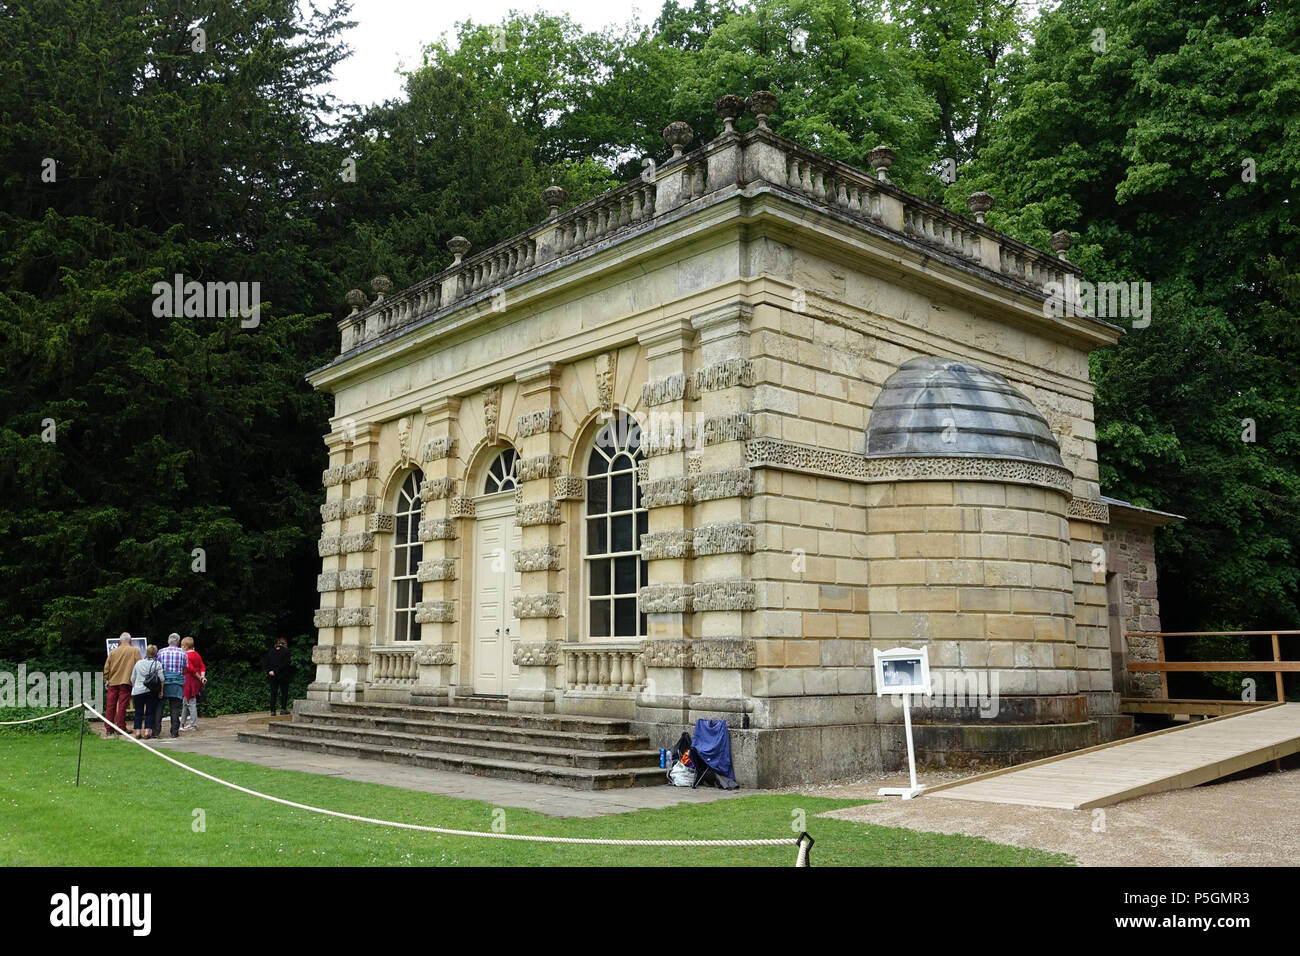 N/A. English: Banqueting House, Studley Royal Park - North Yorkshire, England. 14 June 2016, 08:37:06. Daderot 168 Banqueting House, Studley Royal Park - North Yorkshire, England - DSC00721 Stock Photo